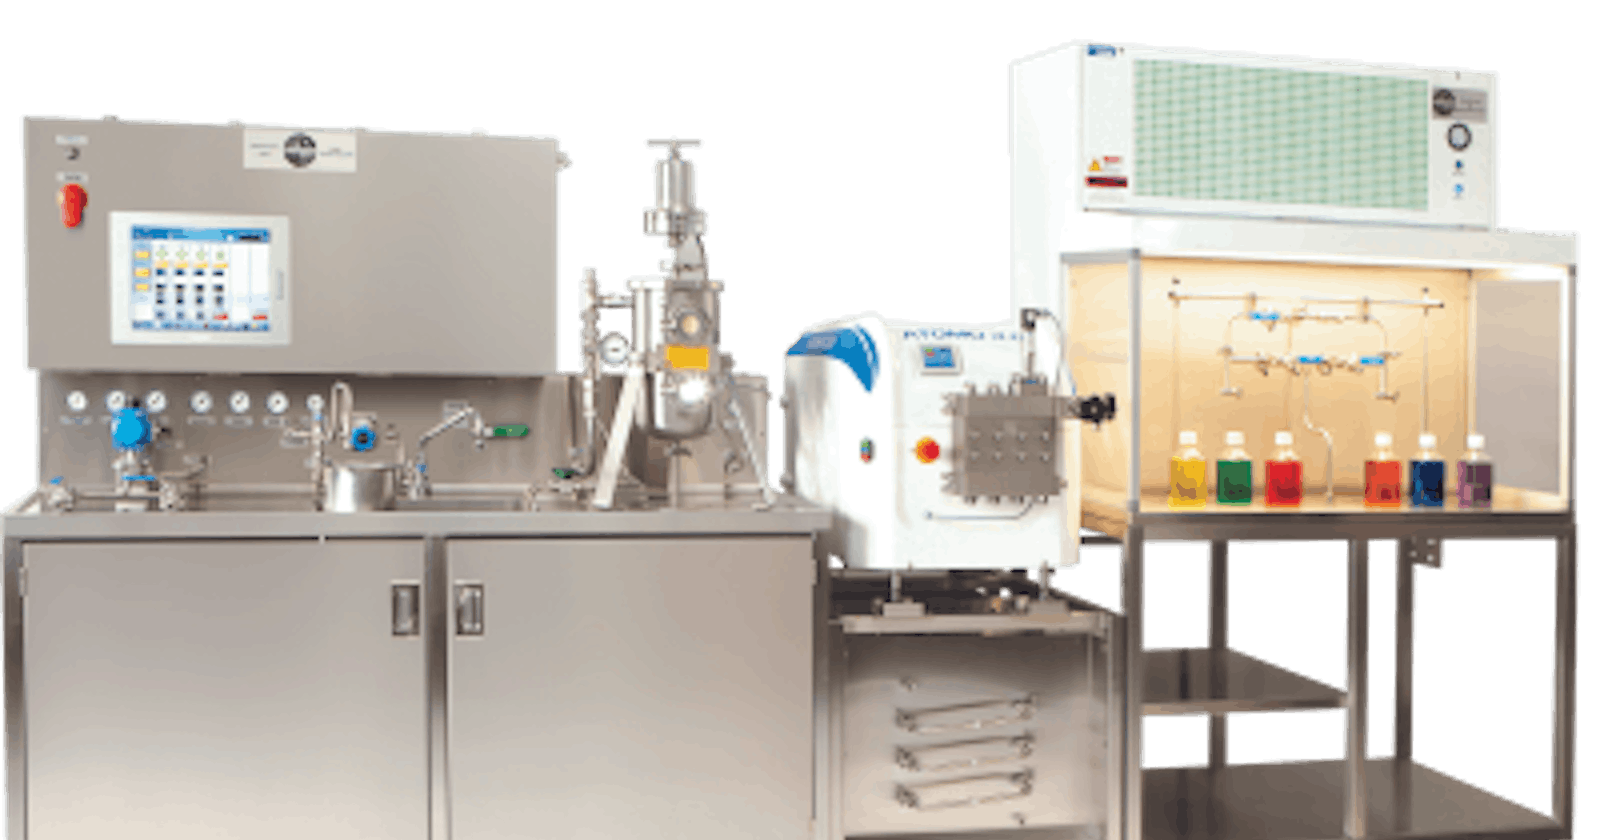 Bringing Innovation to Your Benchtop: Small-Scale Milk Pasteurization Machines from MicroThermics